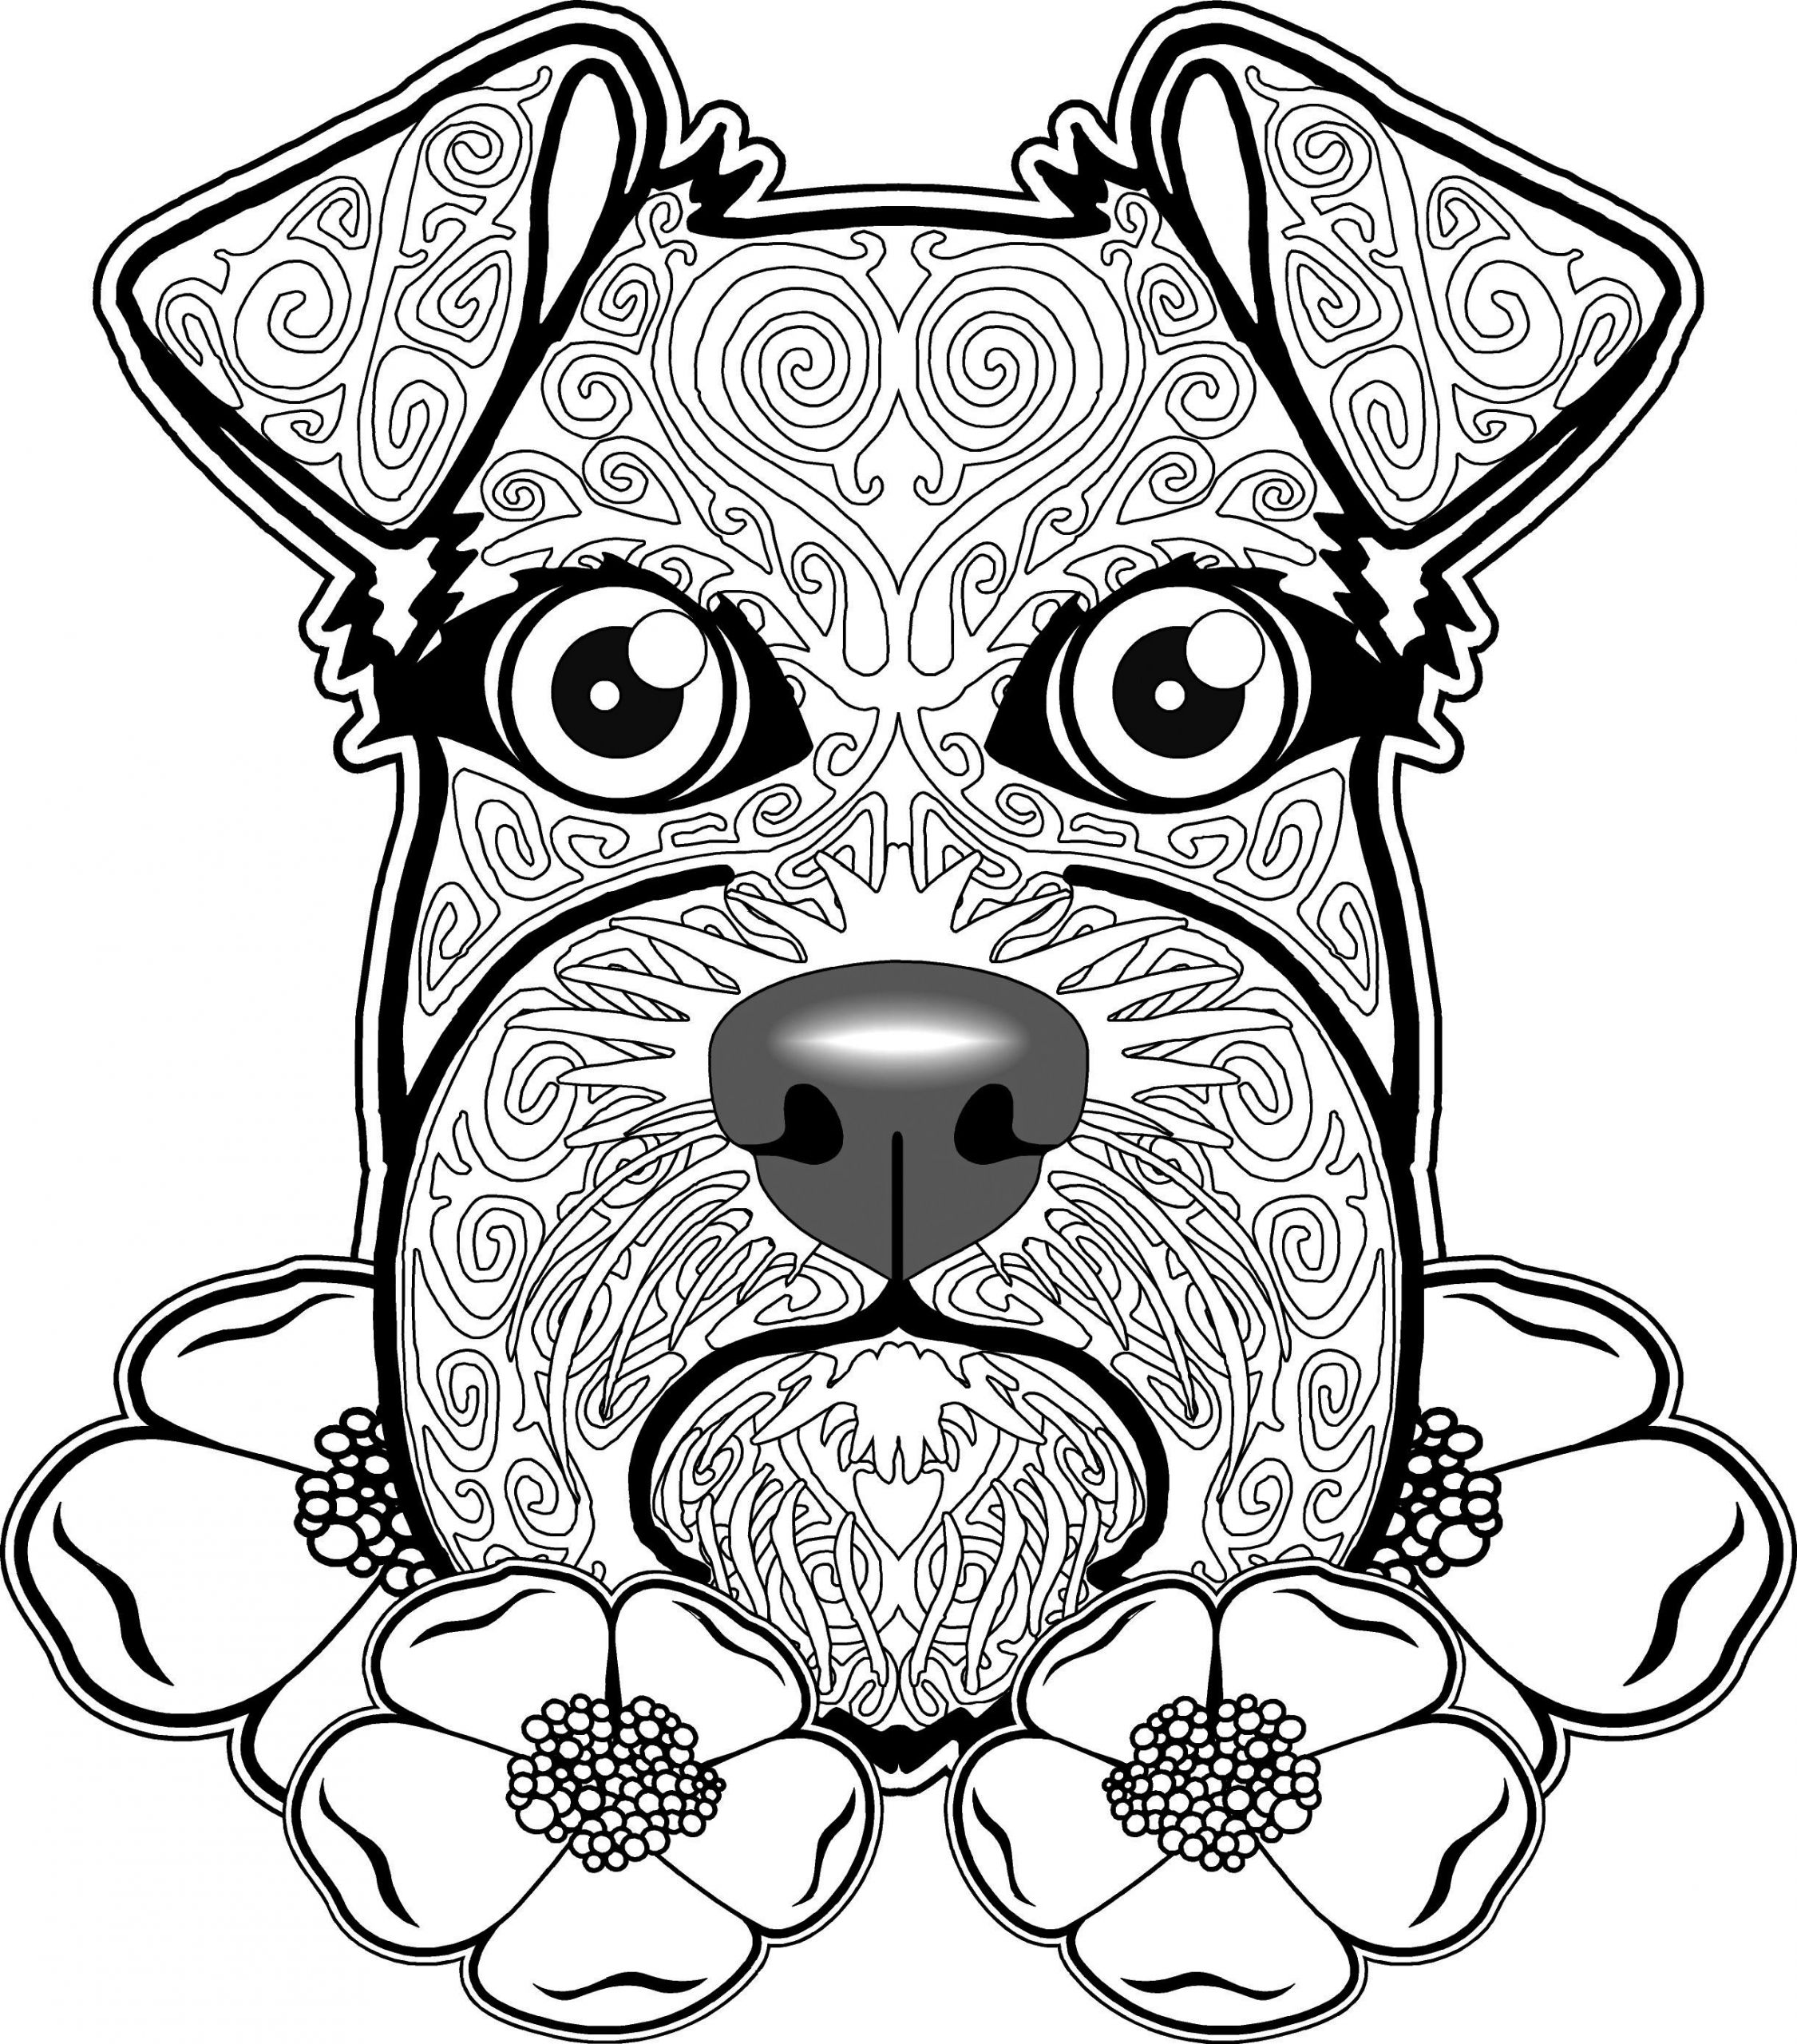 Dog Coloring Book For Adults
 Pitbull Adult Book Coloring Pages